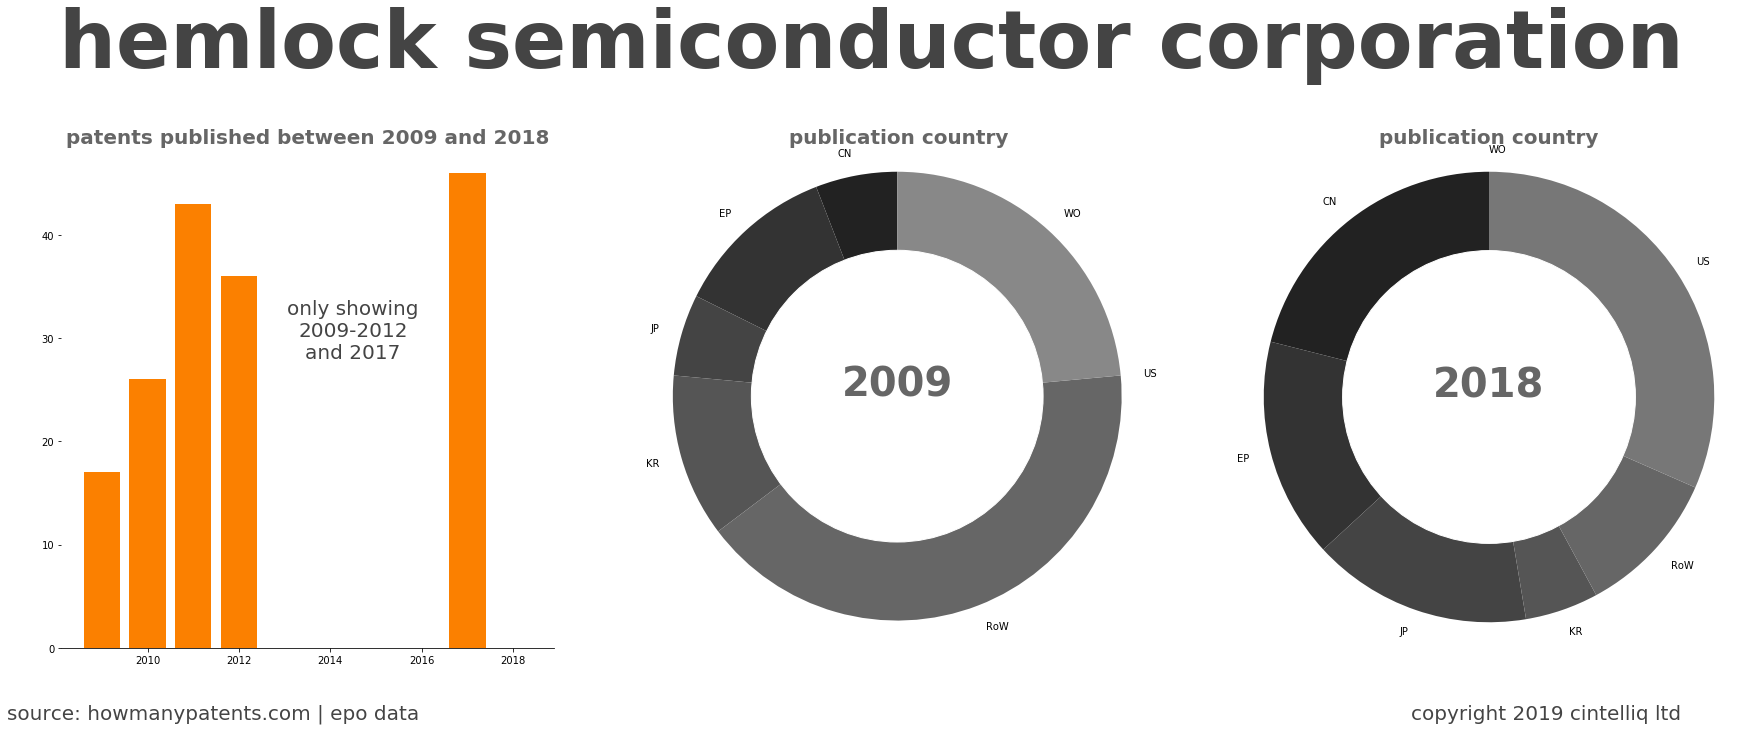 summary of patents for Hemlock Semiconductor Corporation